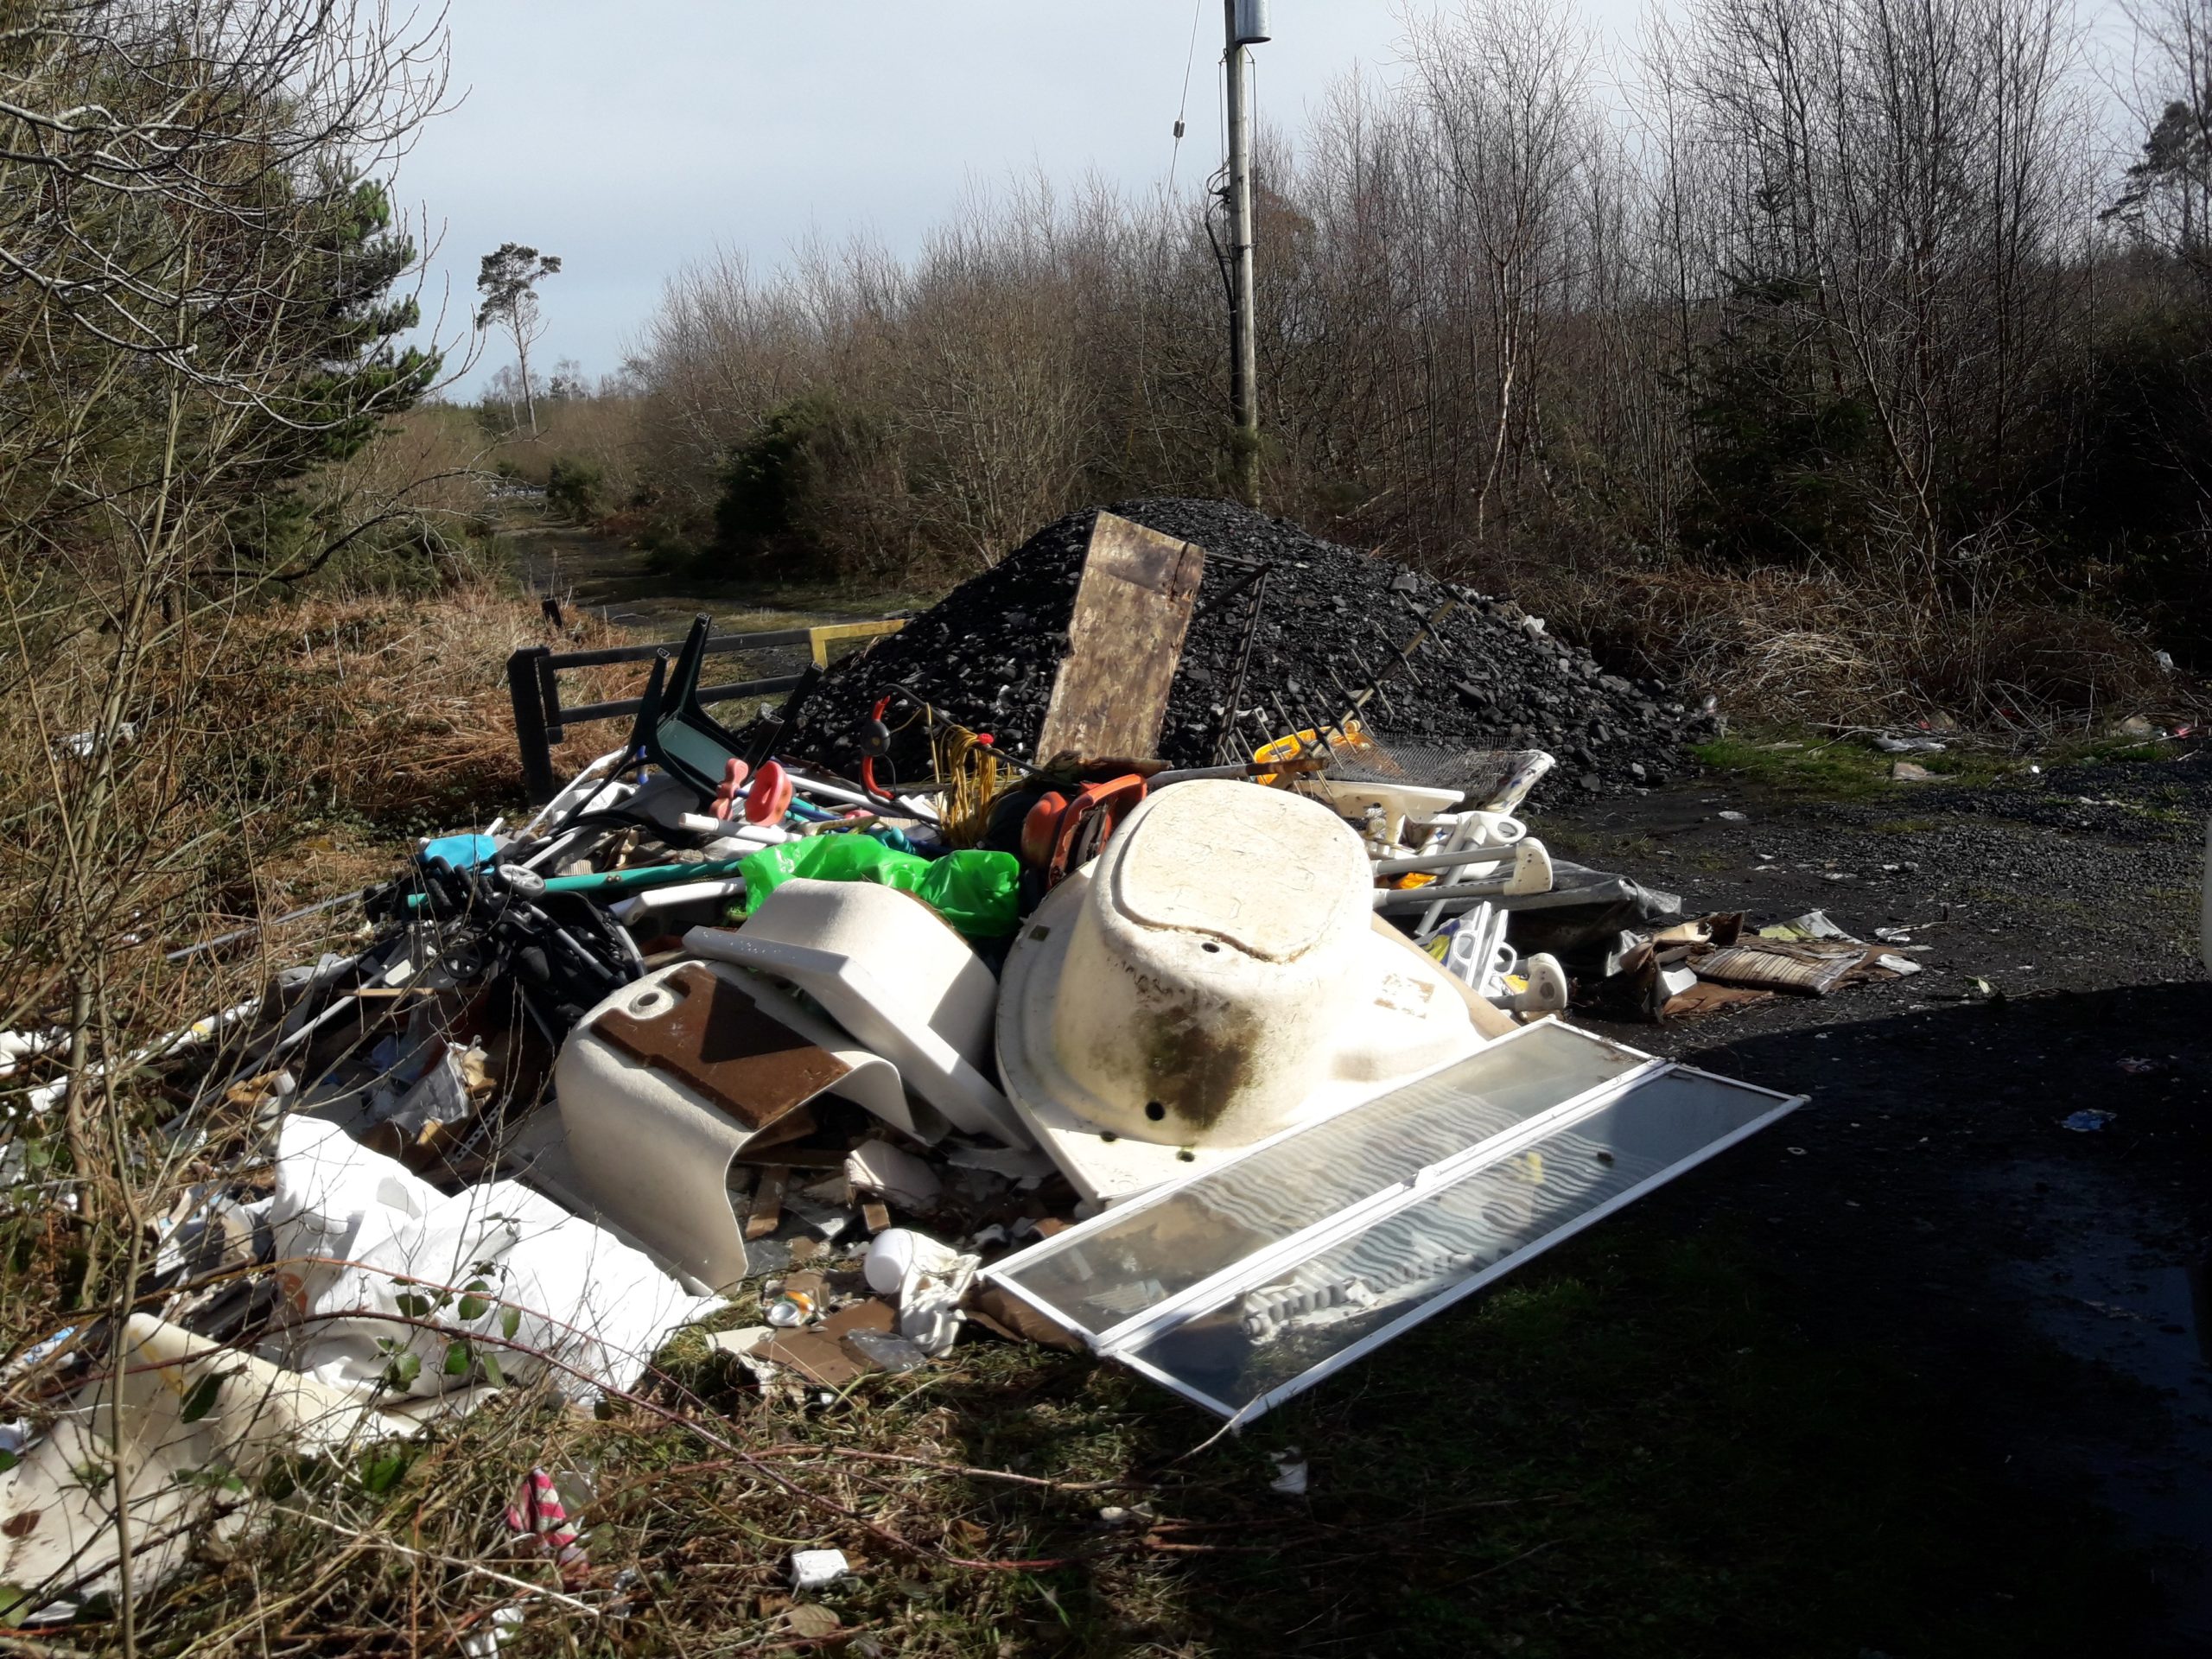 Most common items illegally dumped in Coillte forests during Covid include washing machines, fridge/freezers, household waste, tyres, beds and sofas